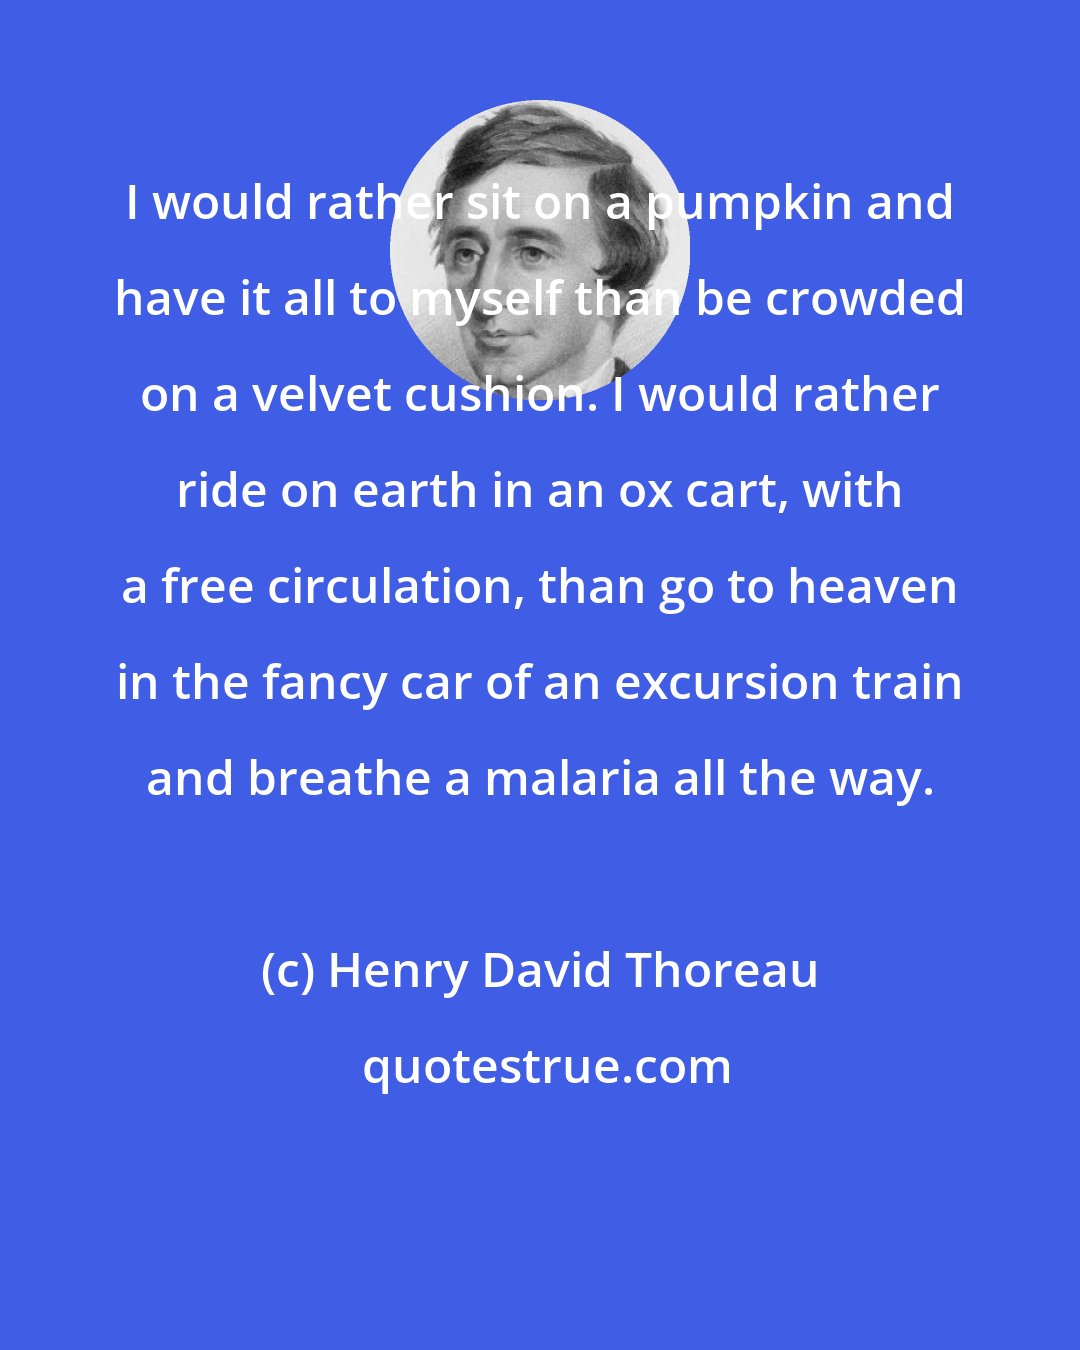 Henry David Thoreau: I would rather sit on a pumpkin and have it all to myself than be crowded on a velvet cushion. I would rather ride on earth in an ox cart, with a free circulation, than go to heaven in the fancy car of an excursion train and breathe a malaria all the way.